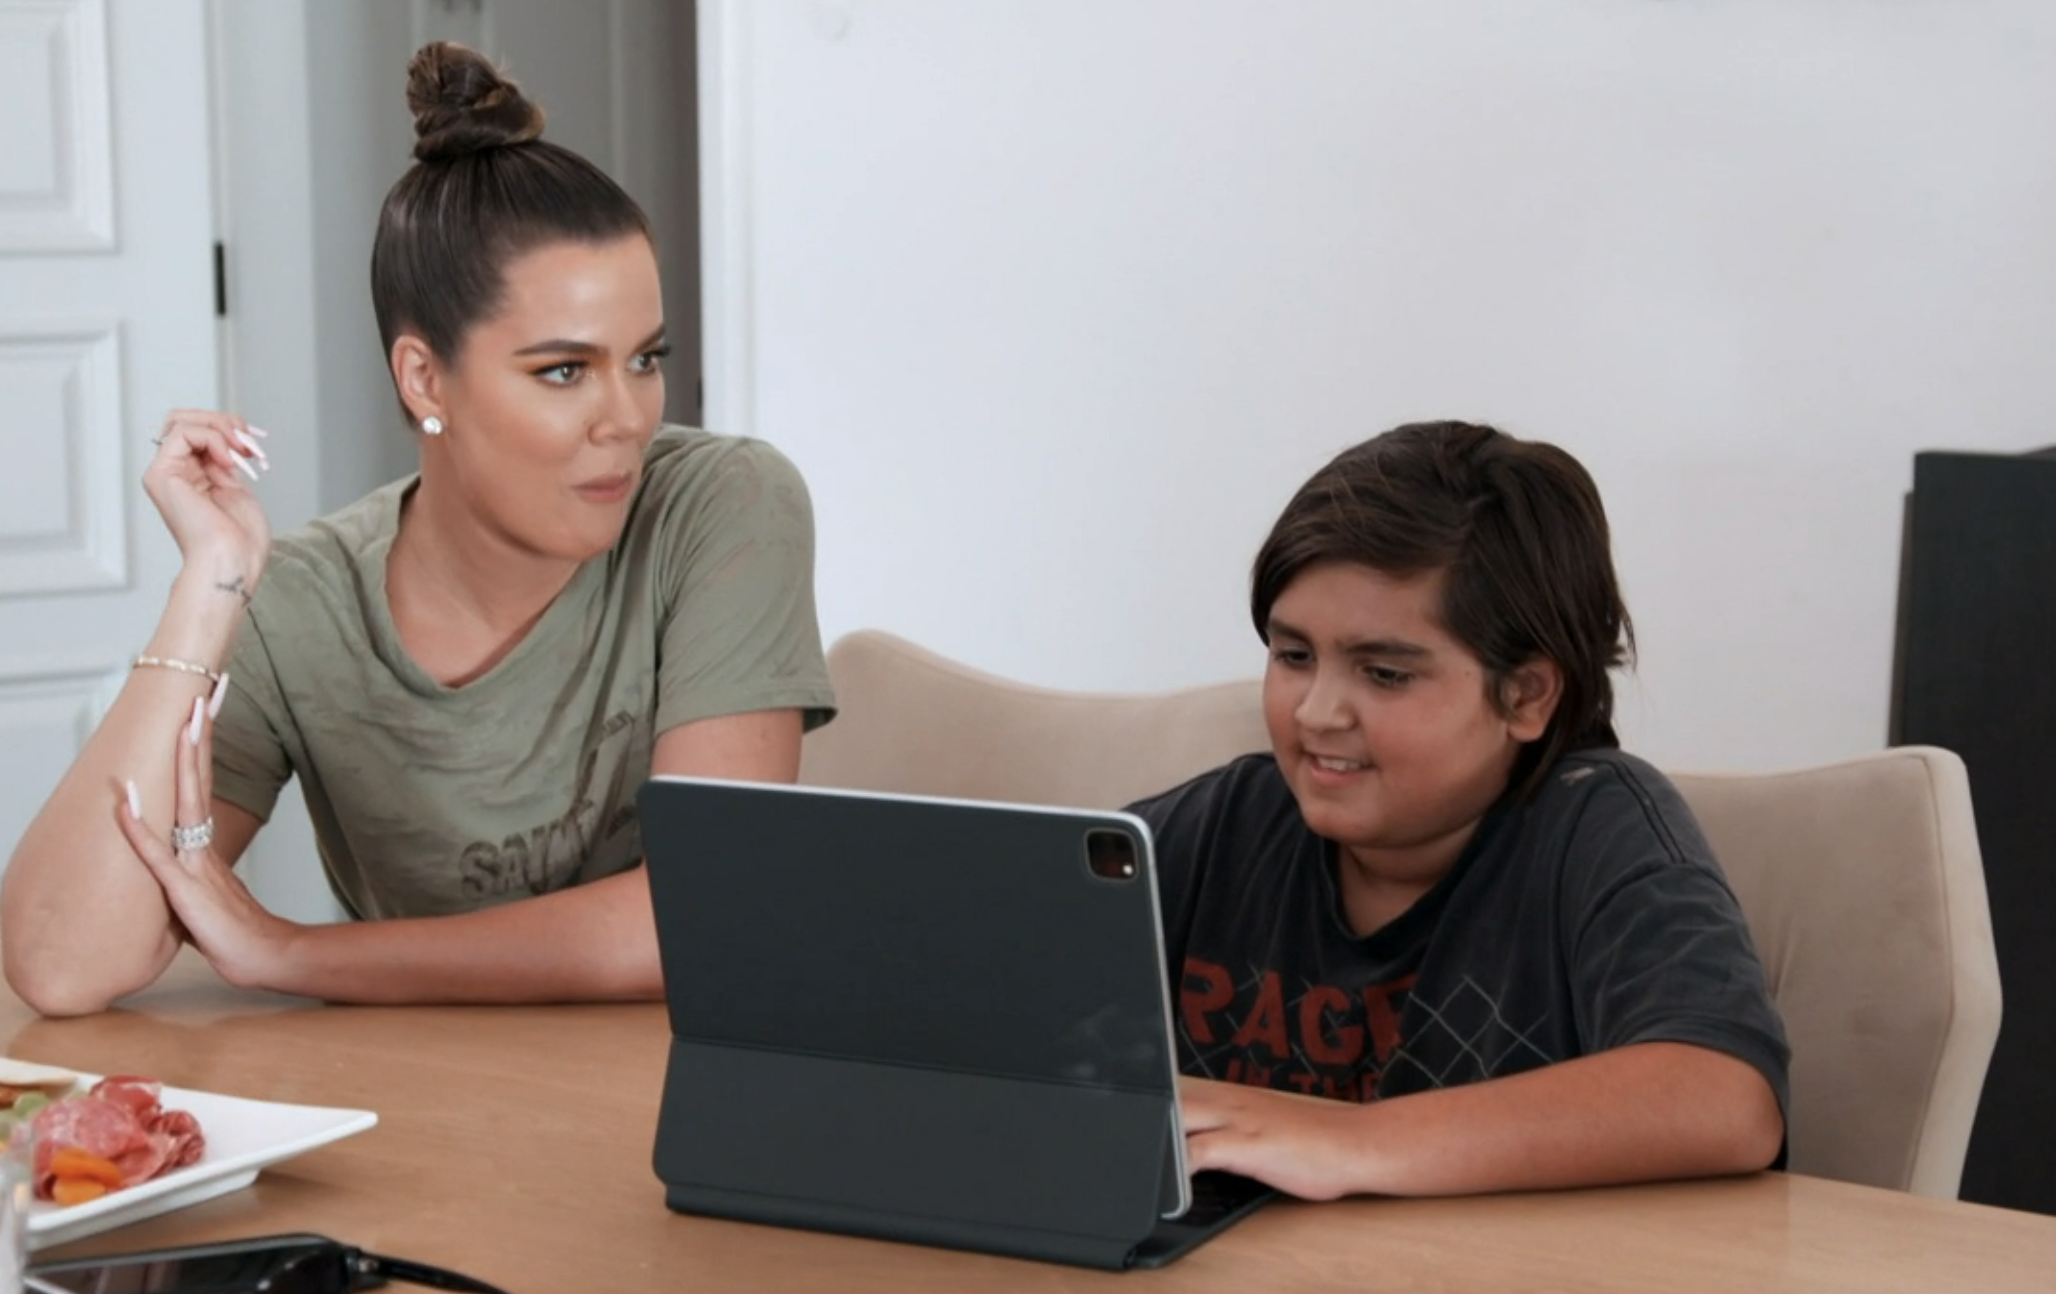 Khloé and Mason sitting at a table in front of a tablet